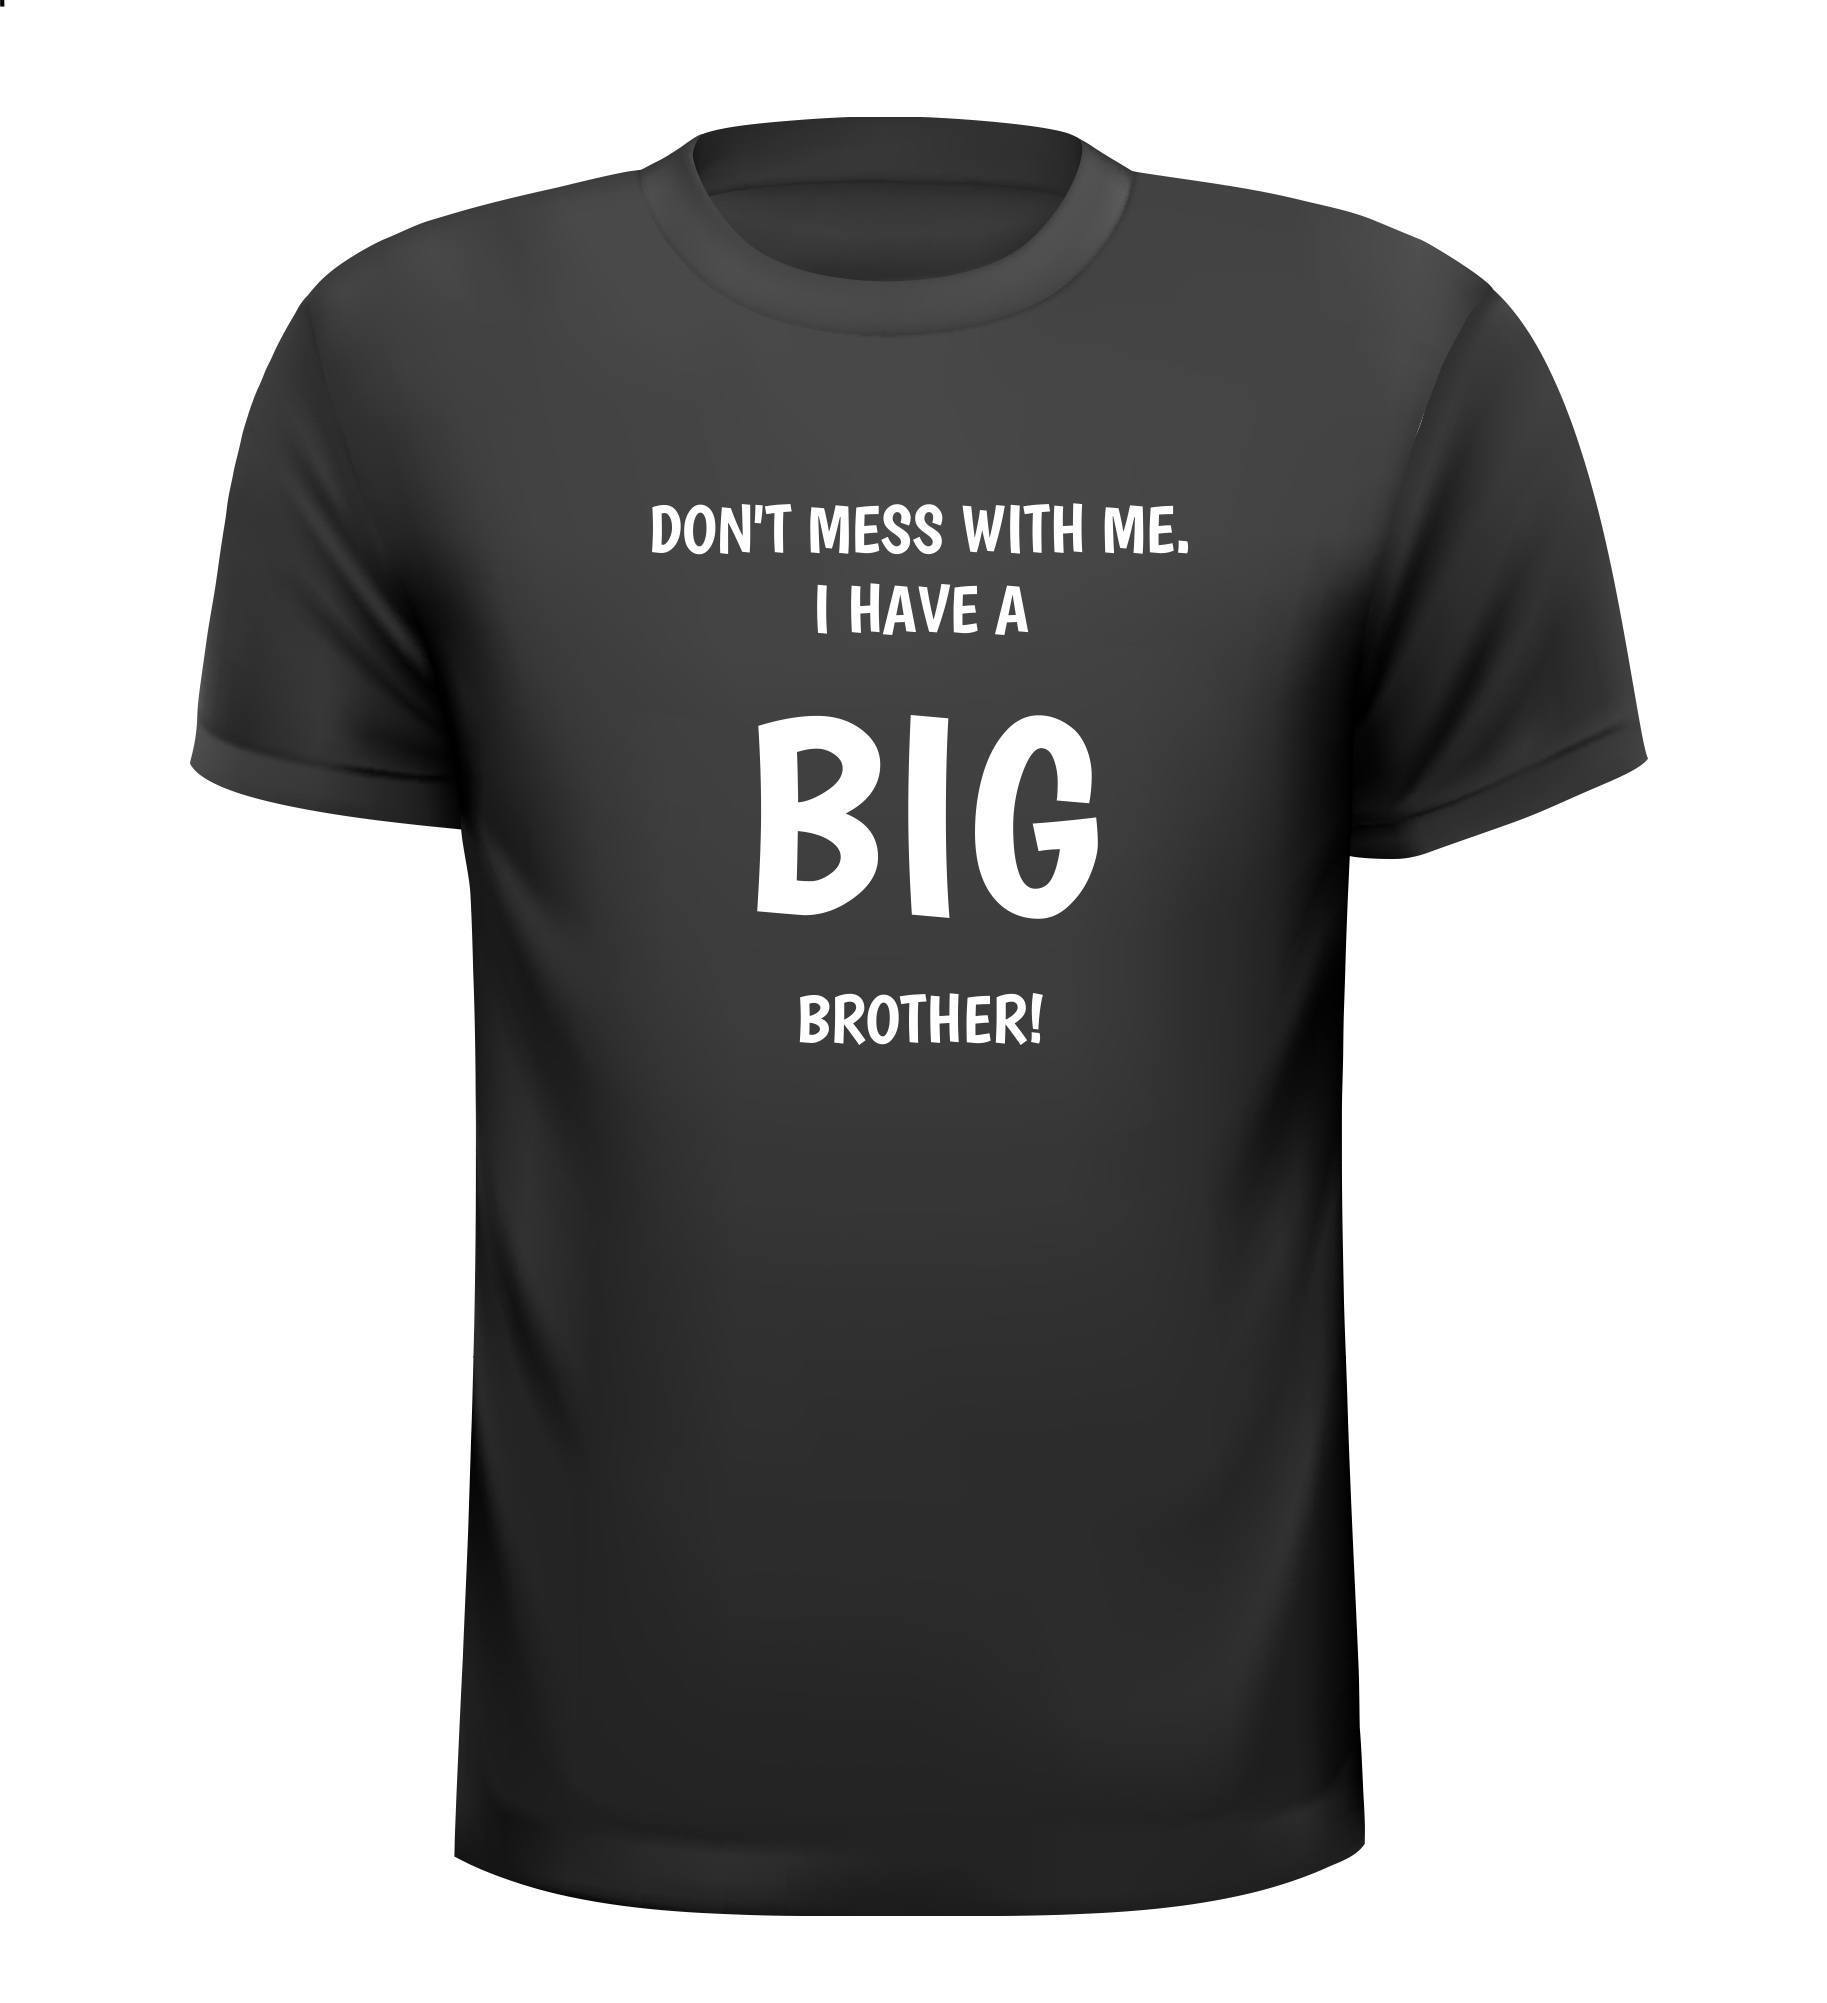 T-shirt Don't mess with me i have a big brother grote broer